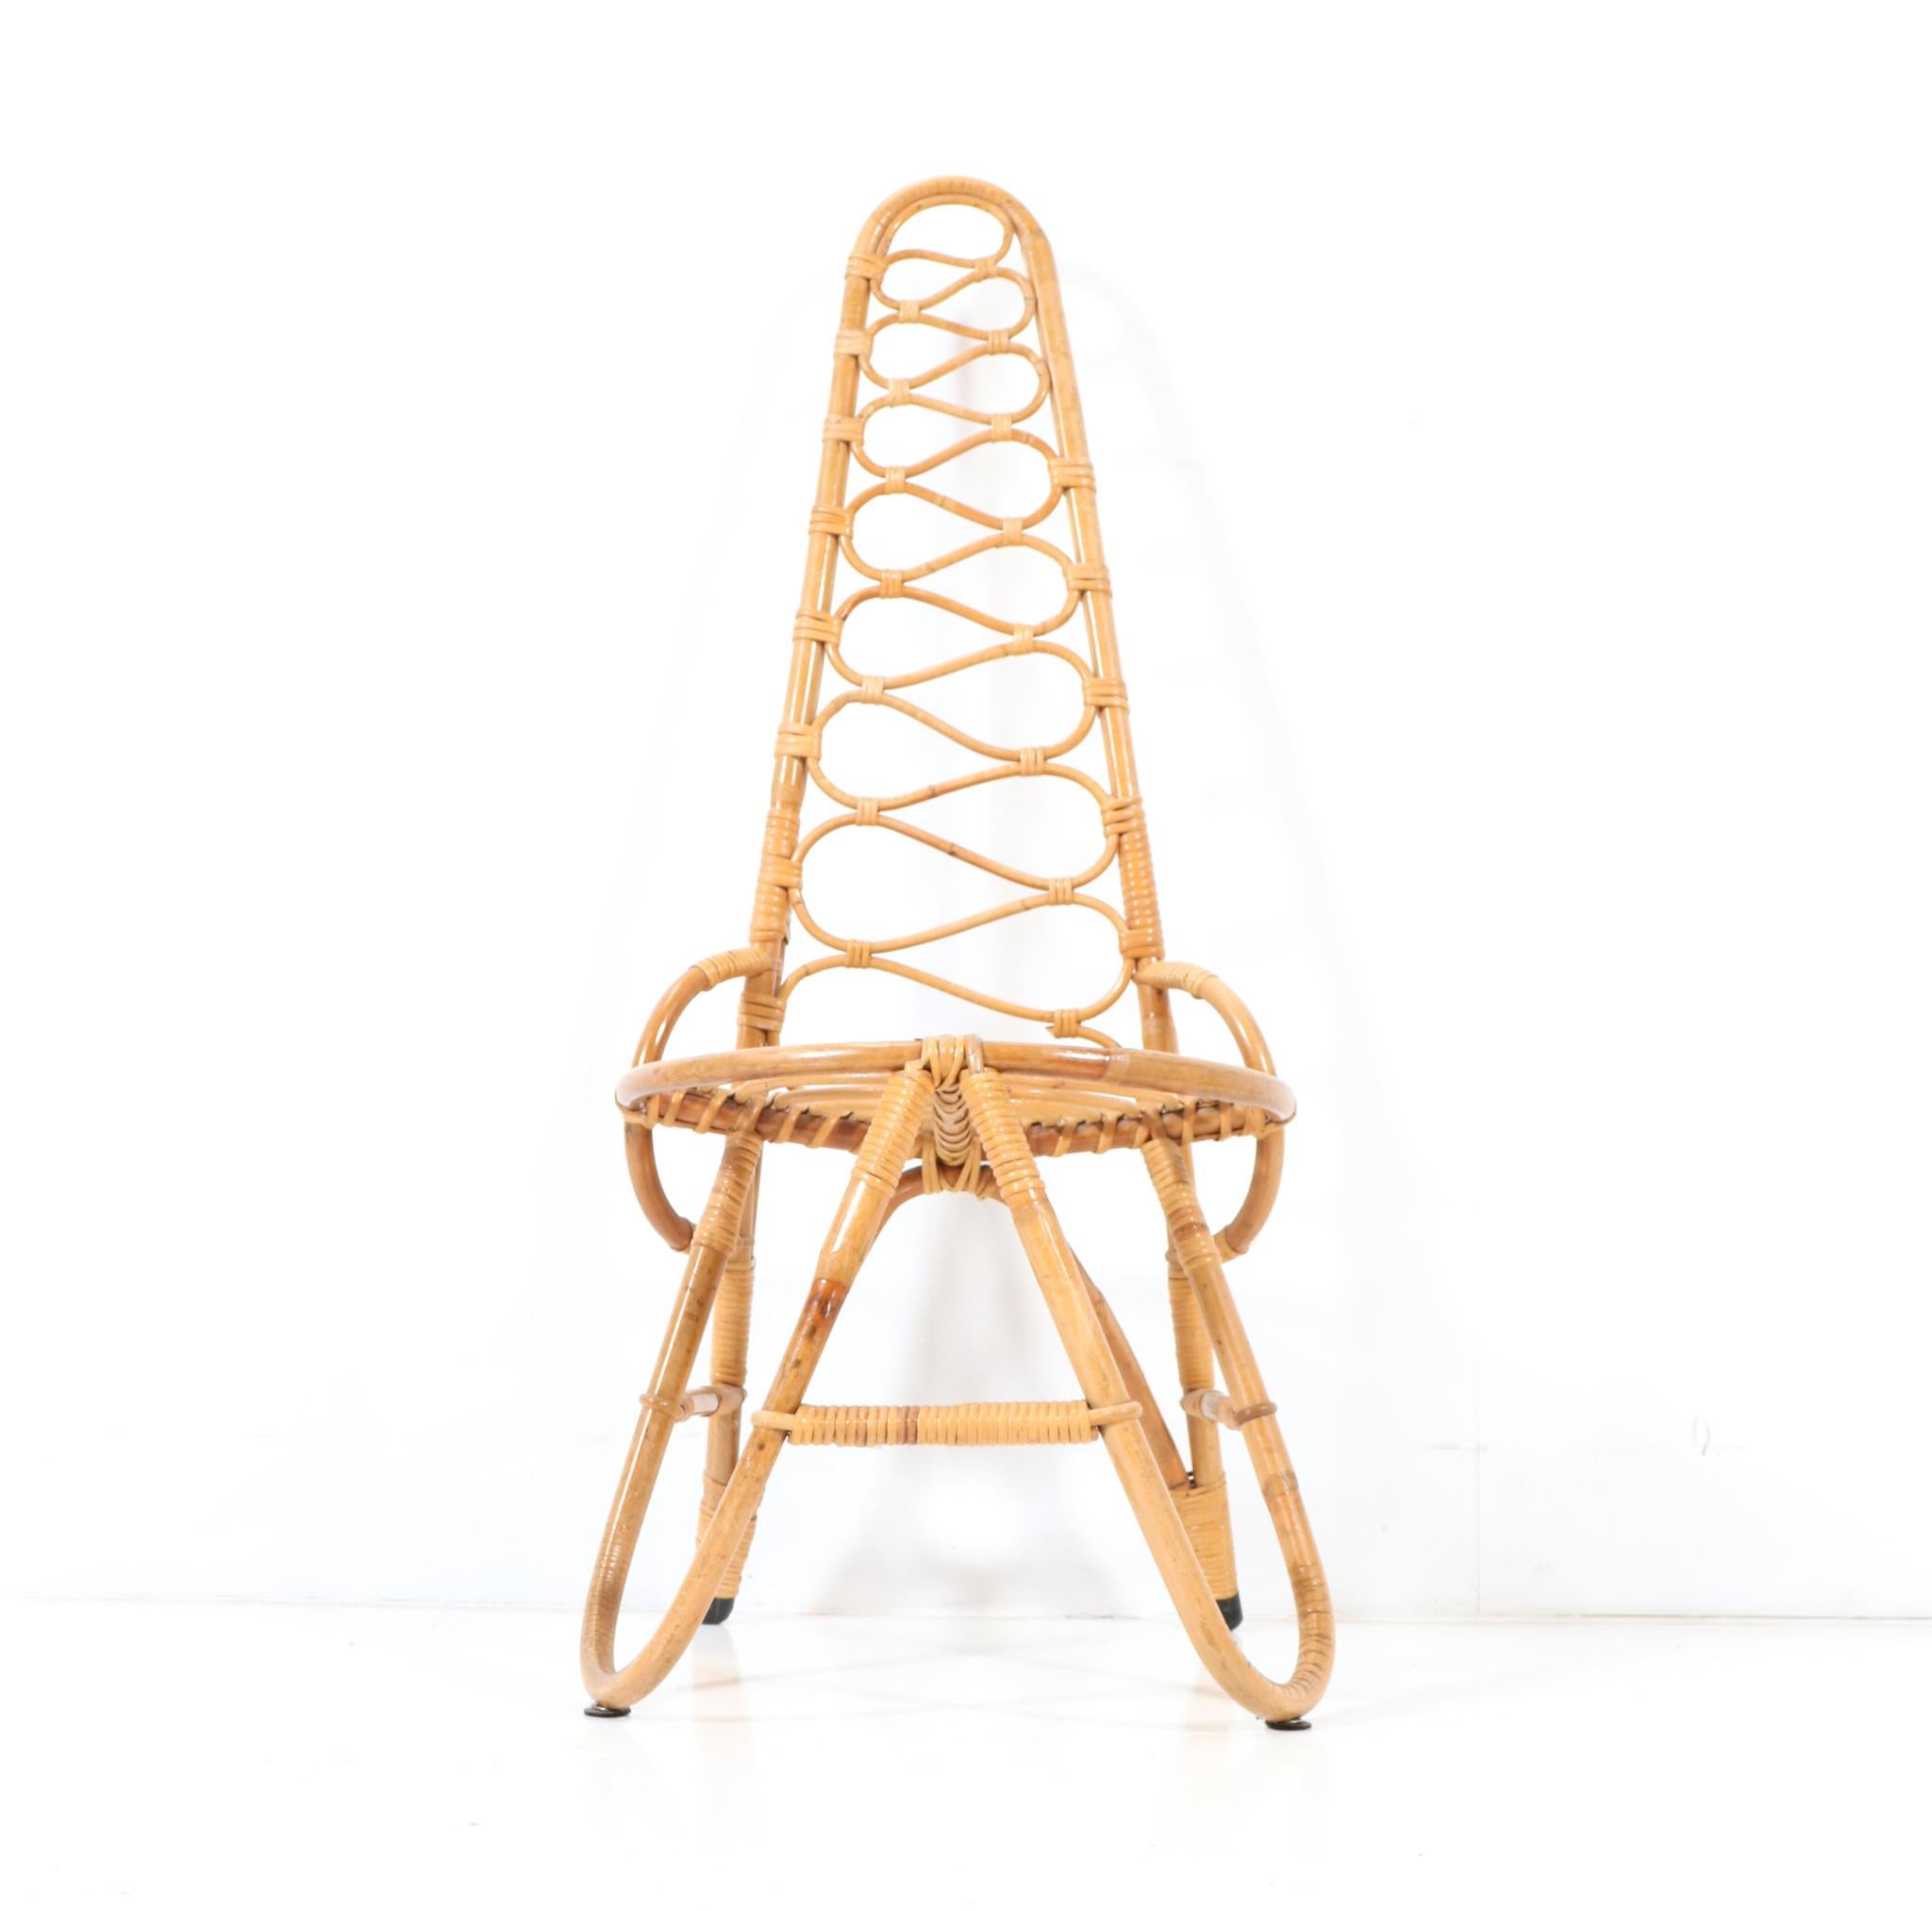 Mid-20th Century Mid-Century Modern Bamboo and Rattan Chair by Dirk van Sliedrecht for Rohe